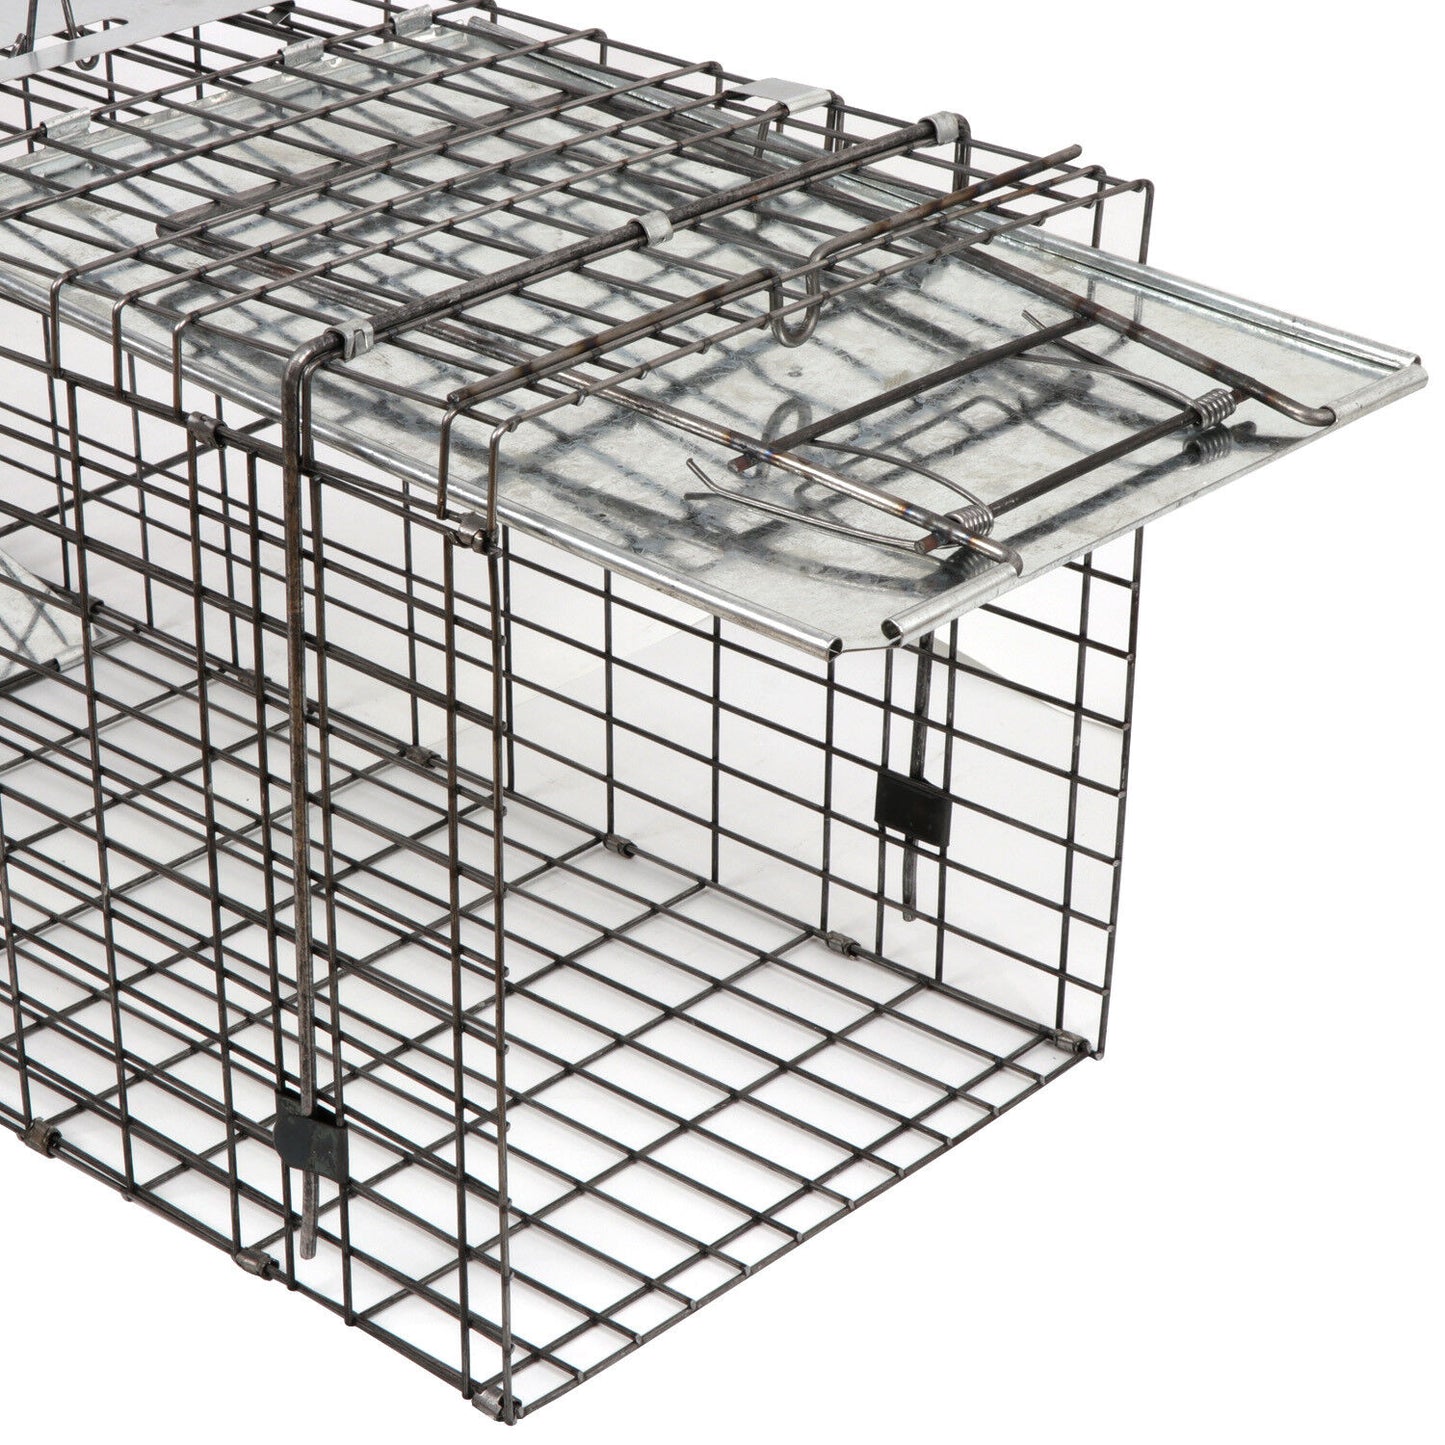 2X 32" Humane Animal Trap Steel Cage for Live Rodent Control Rat Squirrel Raccon